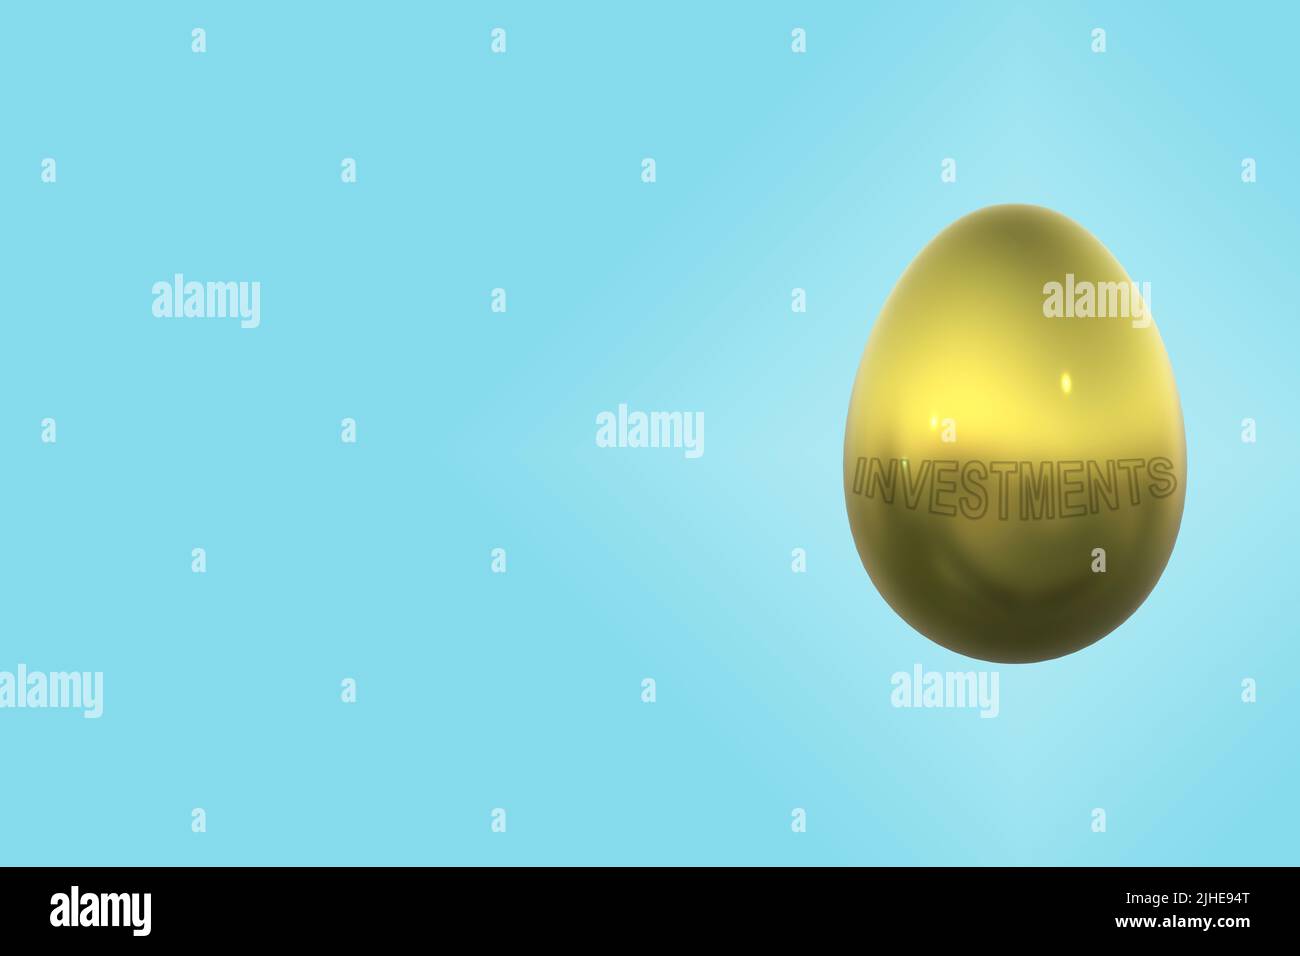 Large gold golden egg eggs savings investments pension pot nest egg concept stamped embossed investments Stock Photo